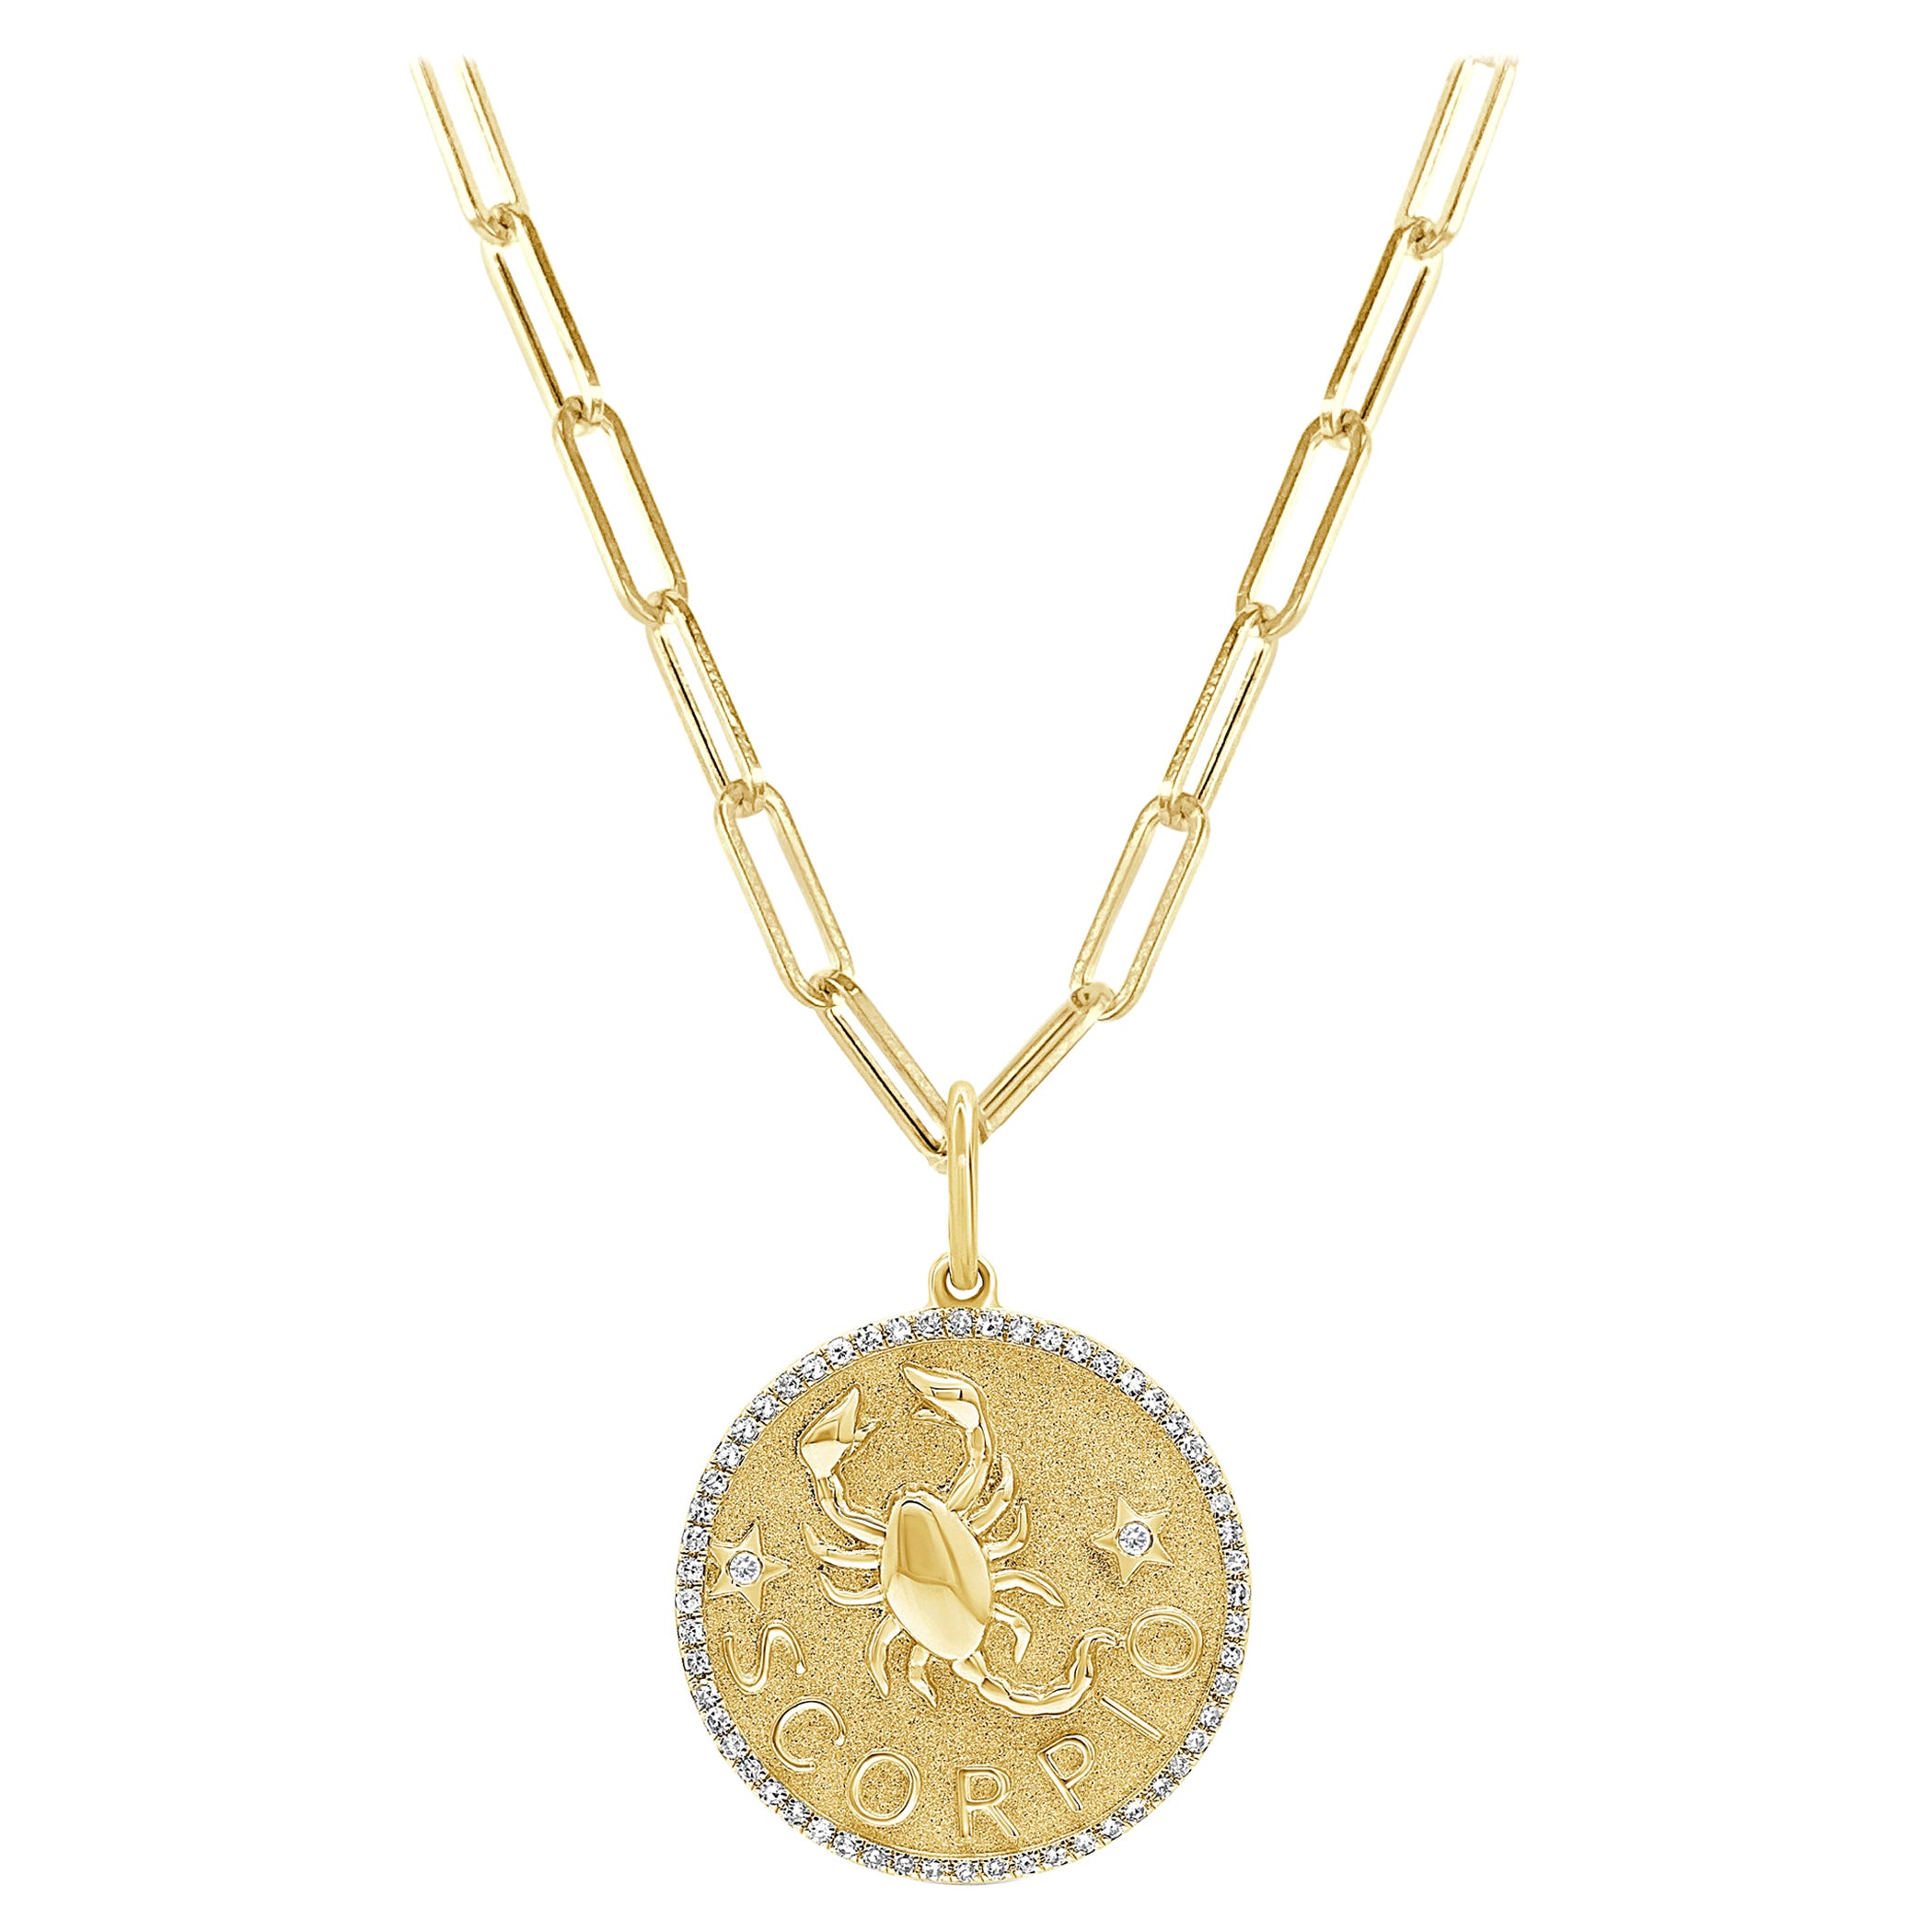 Zodiac Diamond Necklace 14K Yellow Gold 1/5 CT TDW Gifts for Her